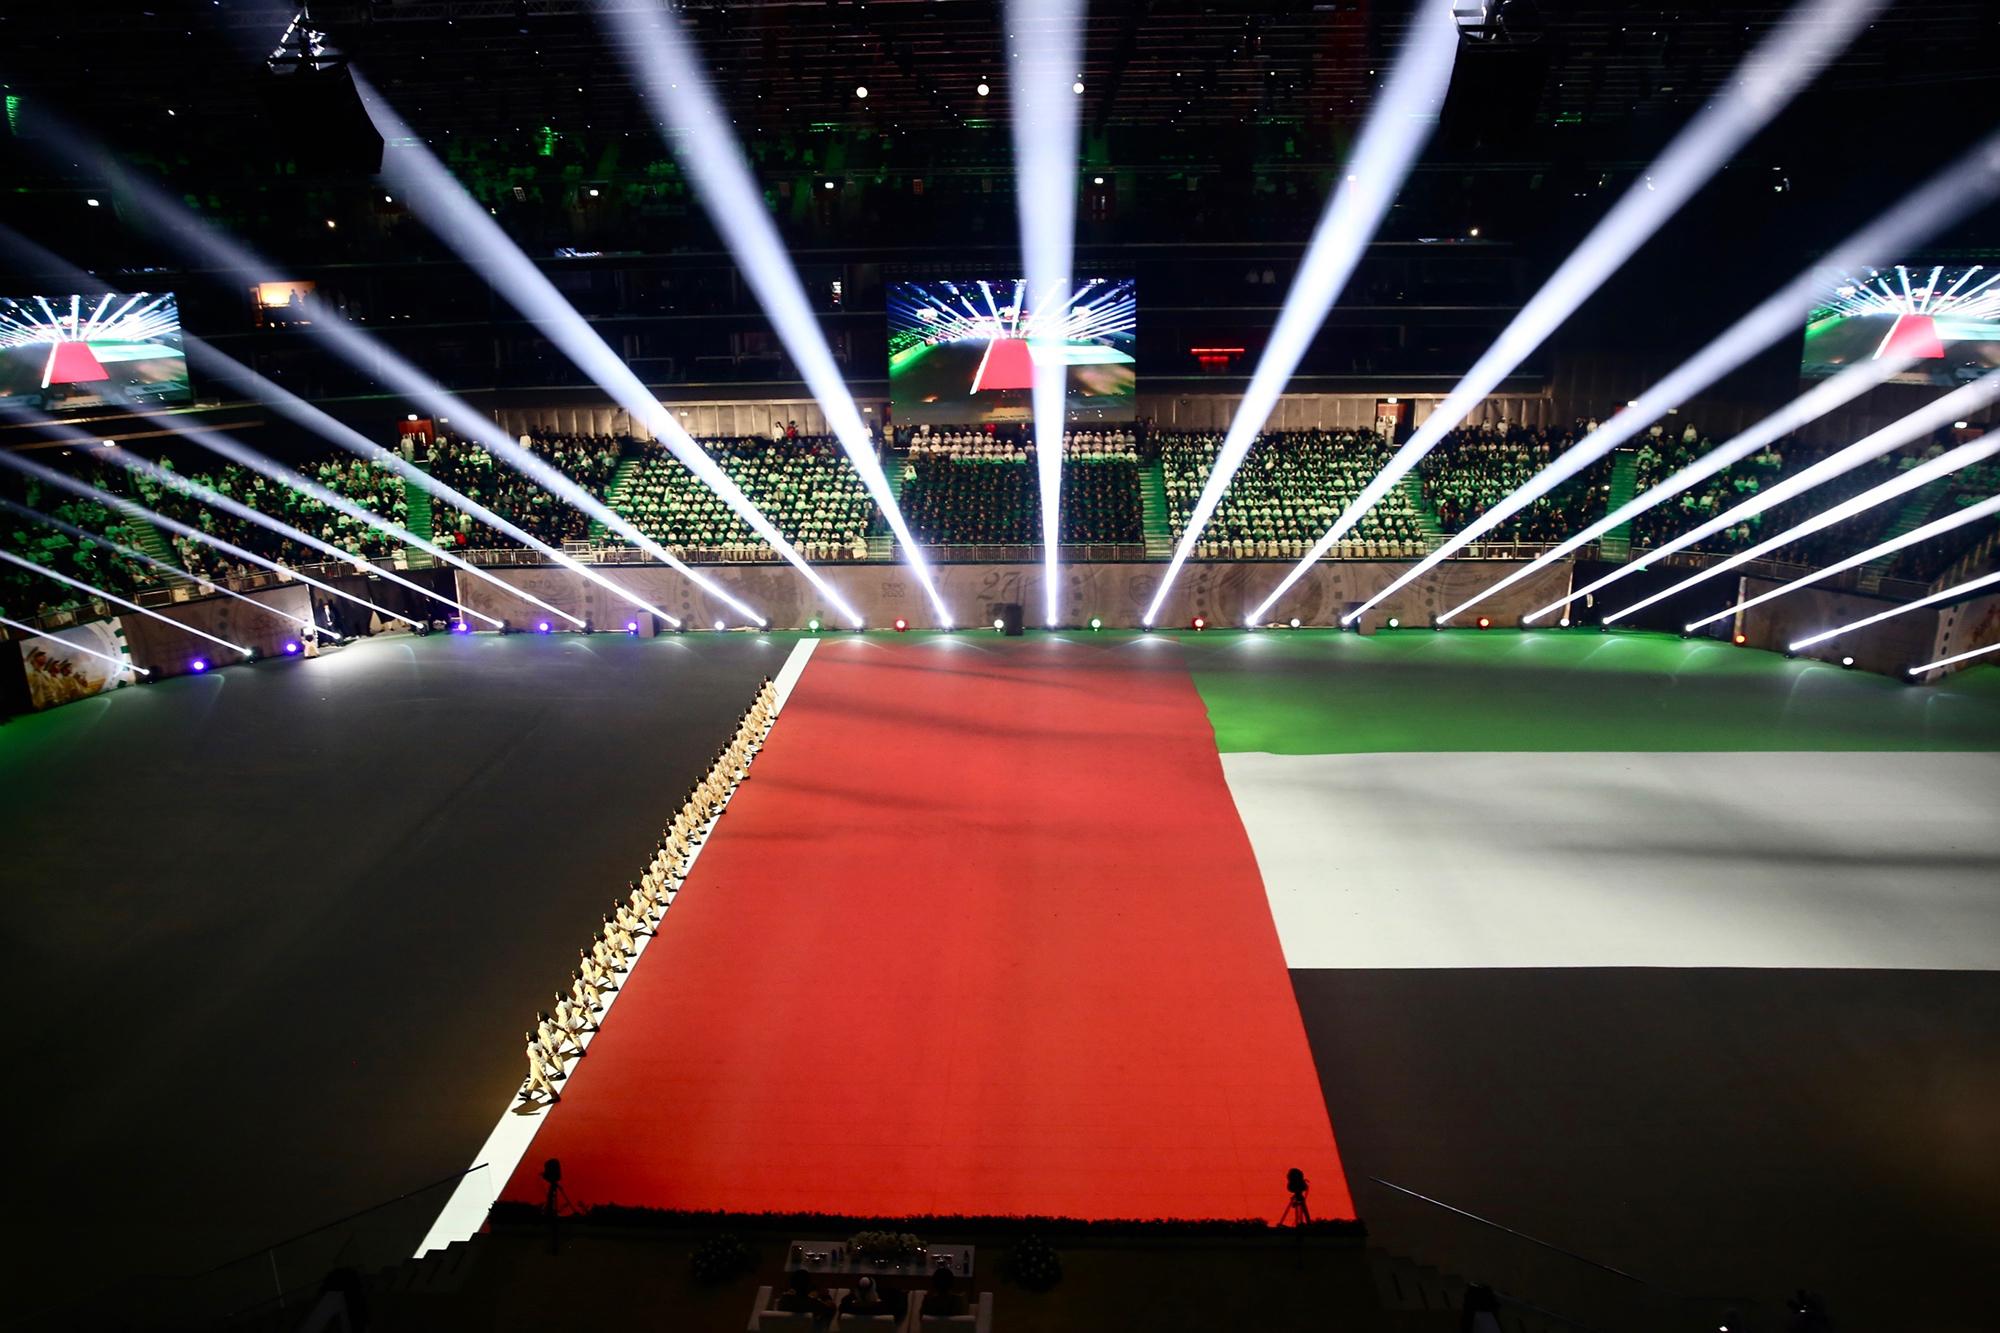 A line of police officers walk in formation across the arena. Behind them the UAE flag unfolds via projection mapping on the ground.